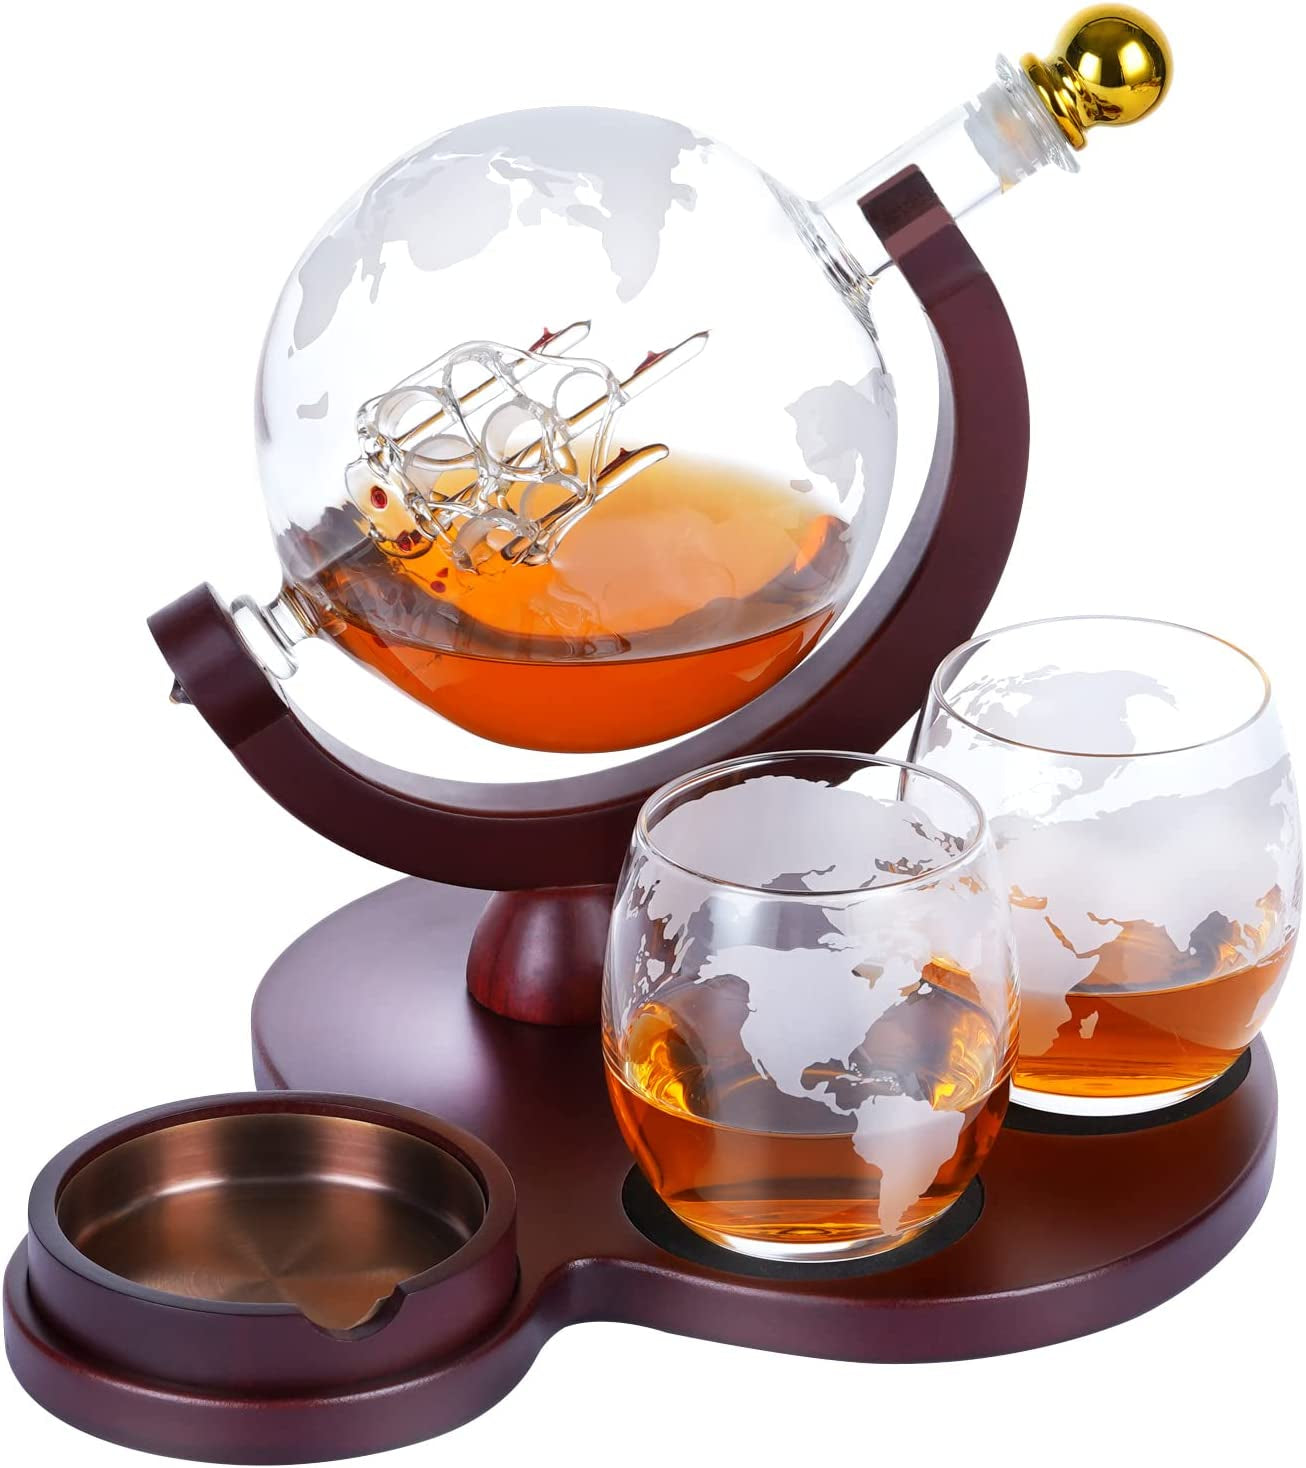 Gifts for Men Dad, Unique Valentines Day Anniversary Birthday Gift for Him Husband Boyfriend Groomsmen, Globe Decanter Set with 2 Glasses, Wedding Bourbon Liquor Scotch Cool Stuff Presents for Her